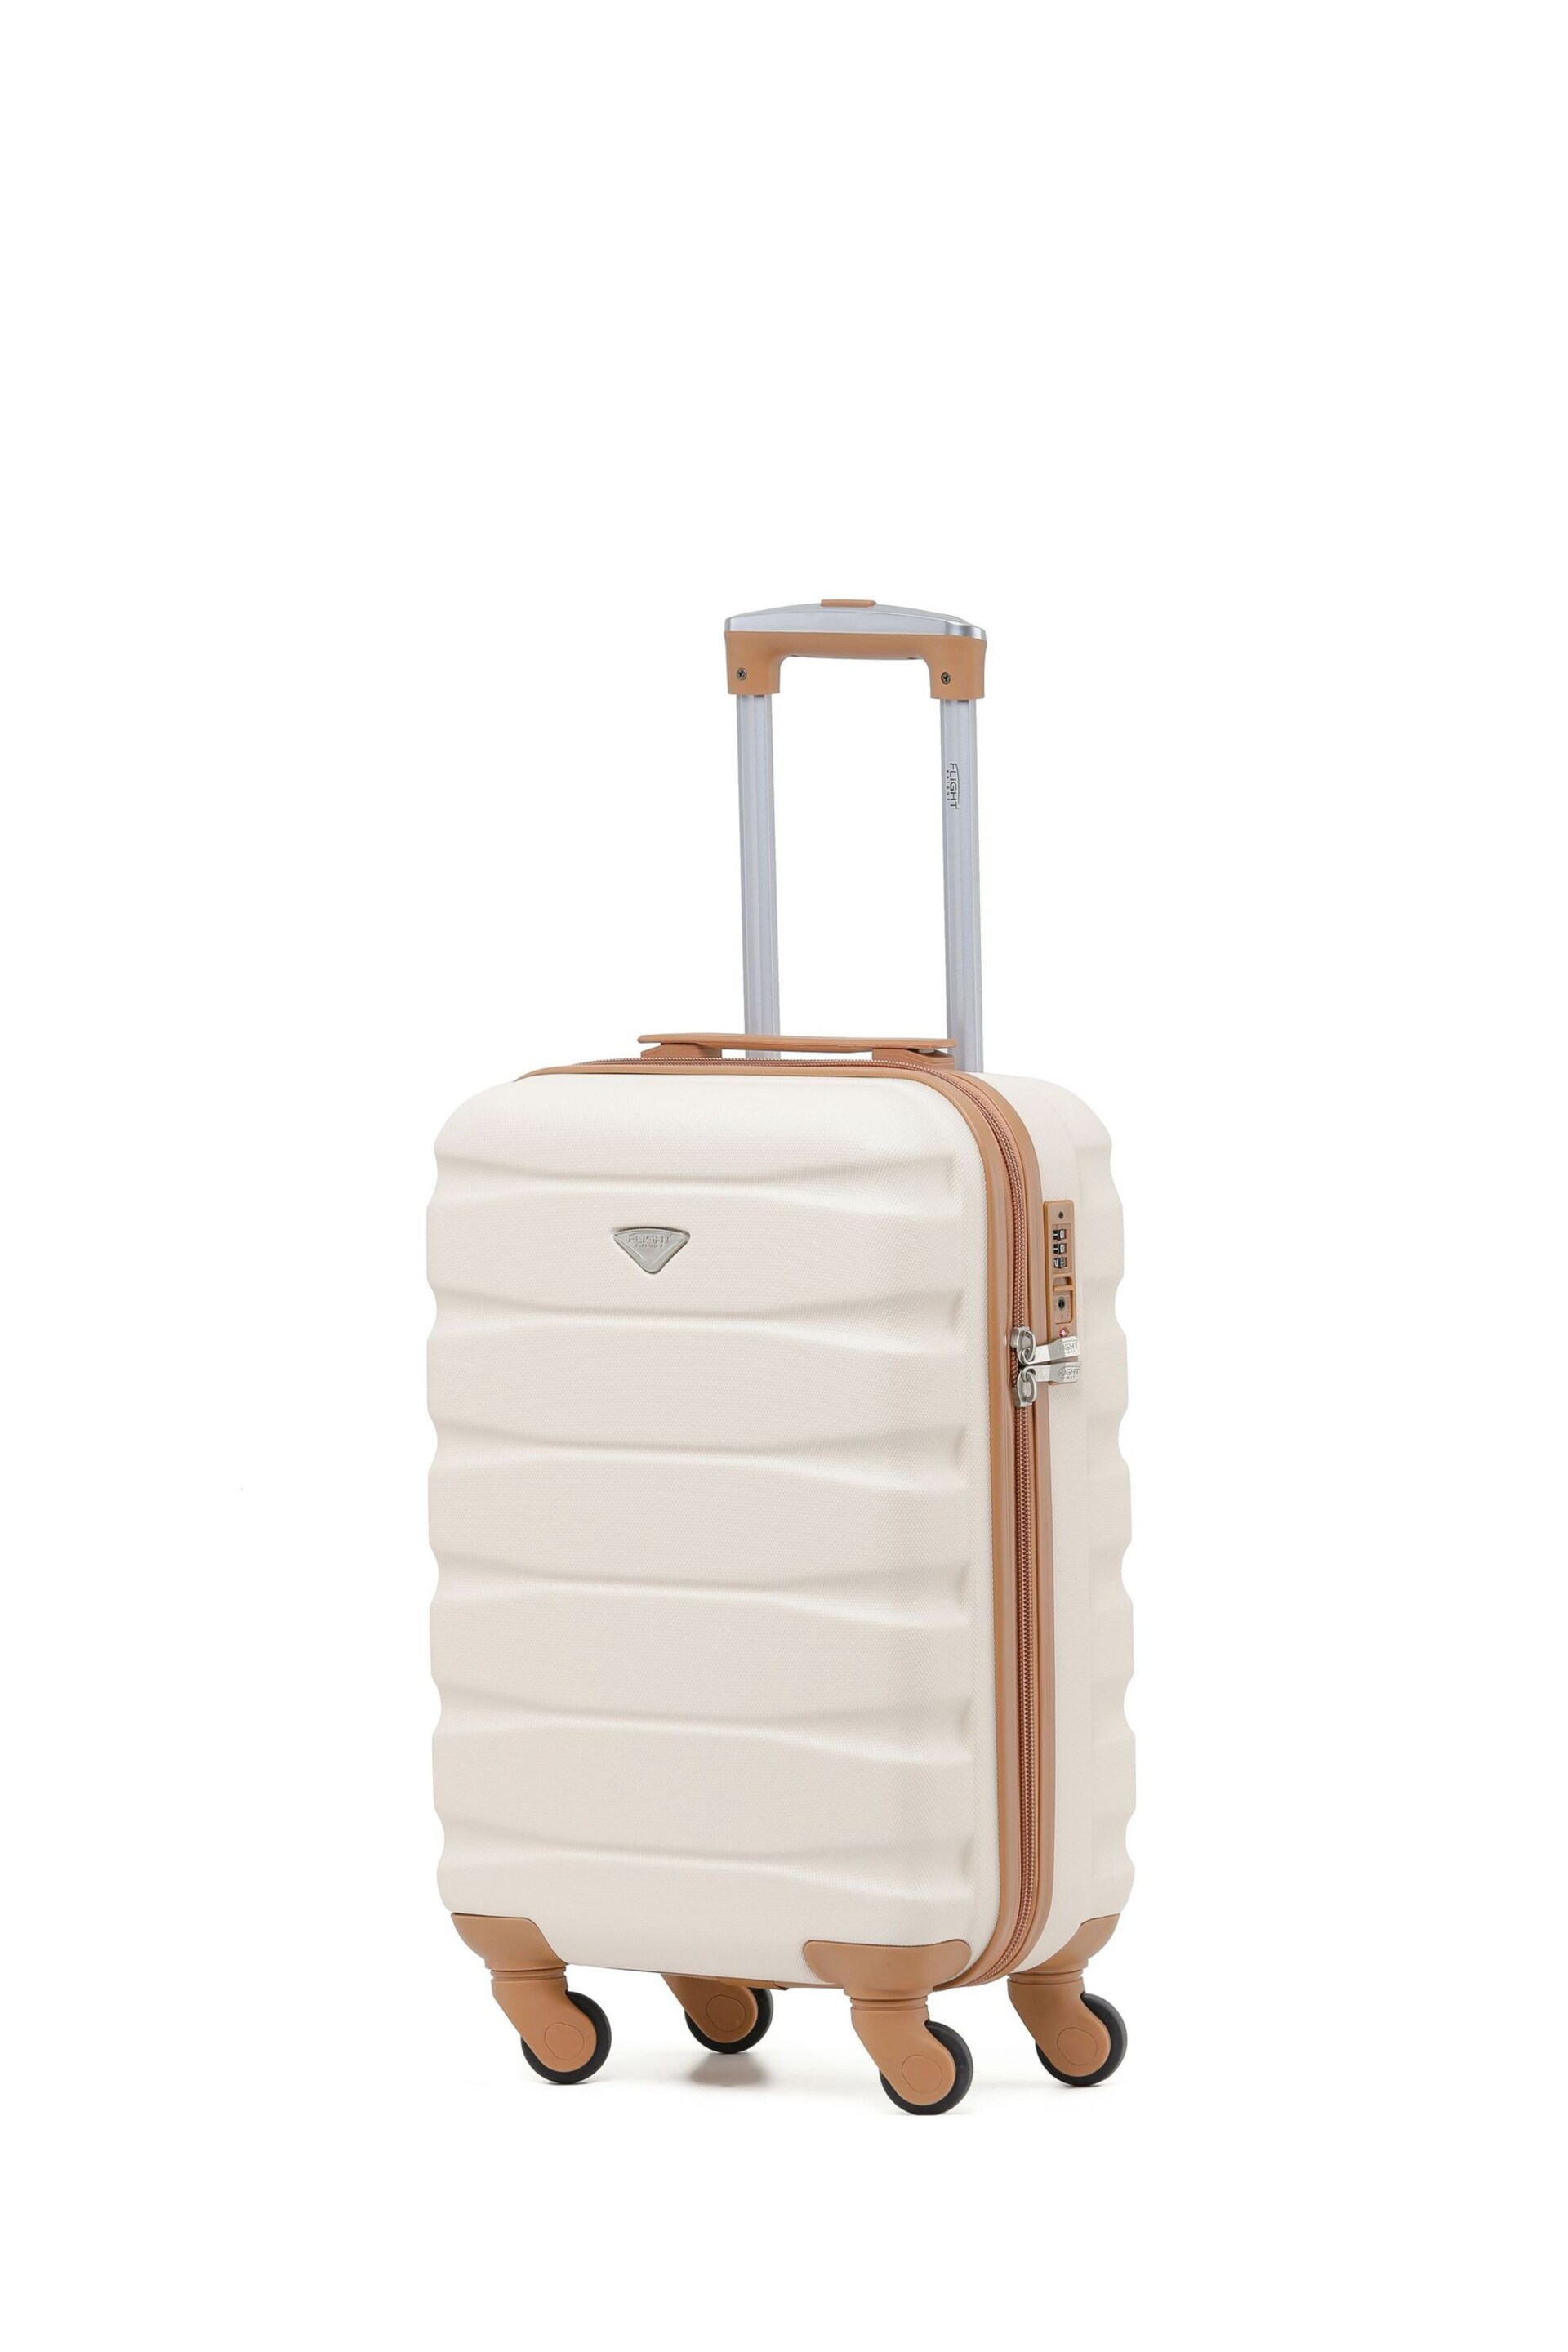 Flight Knight 55x35x20cm 4 Wheel ABS Hard Case Cabin Carry On Hand Luggage - Image 1 of 7